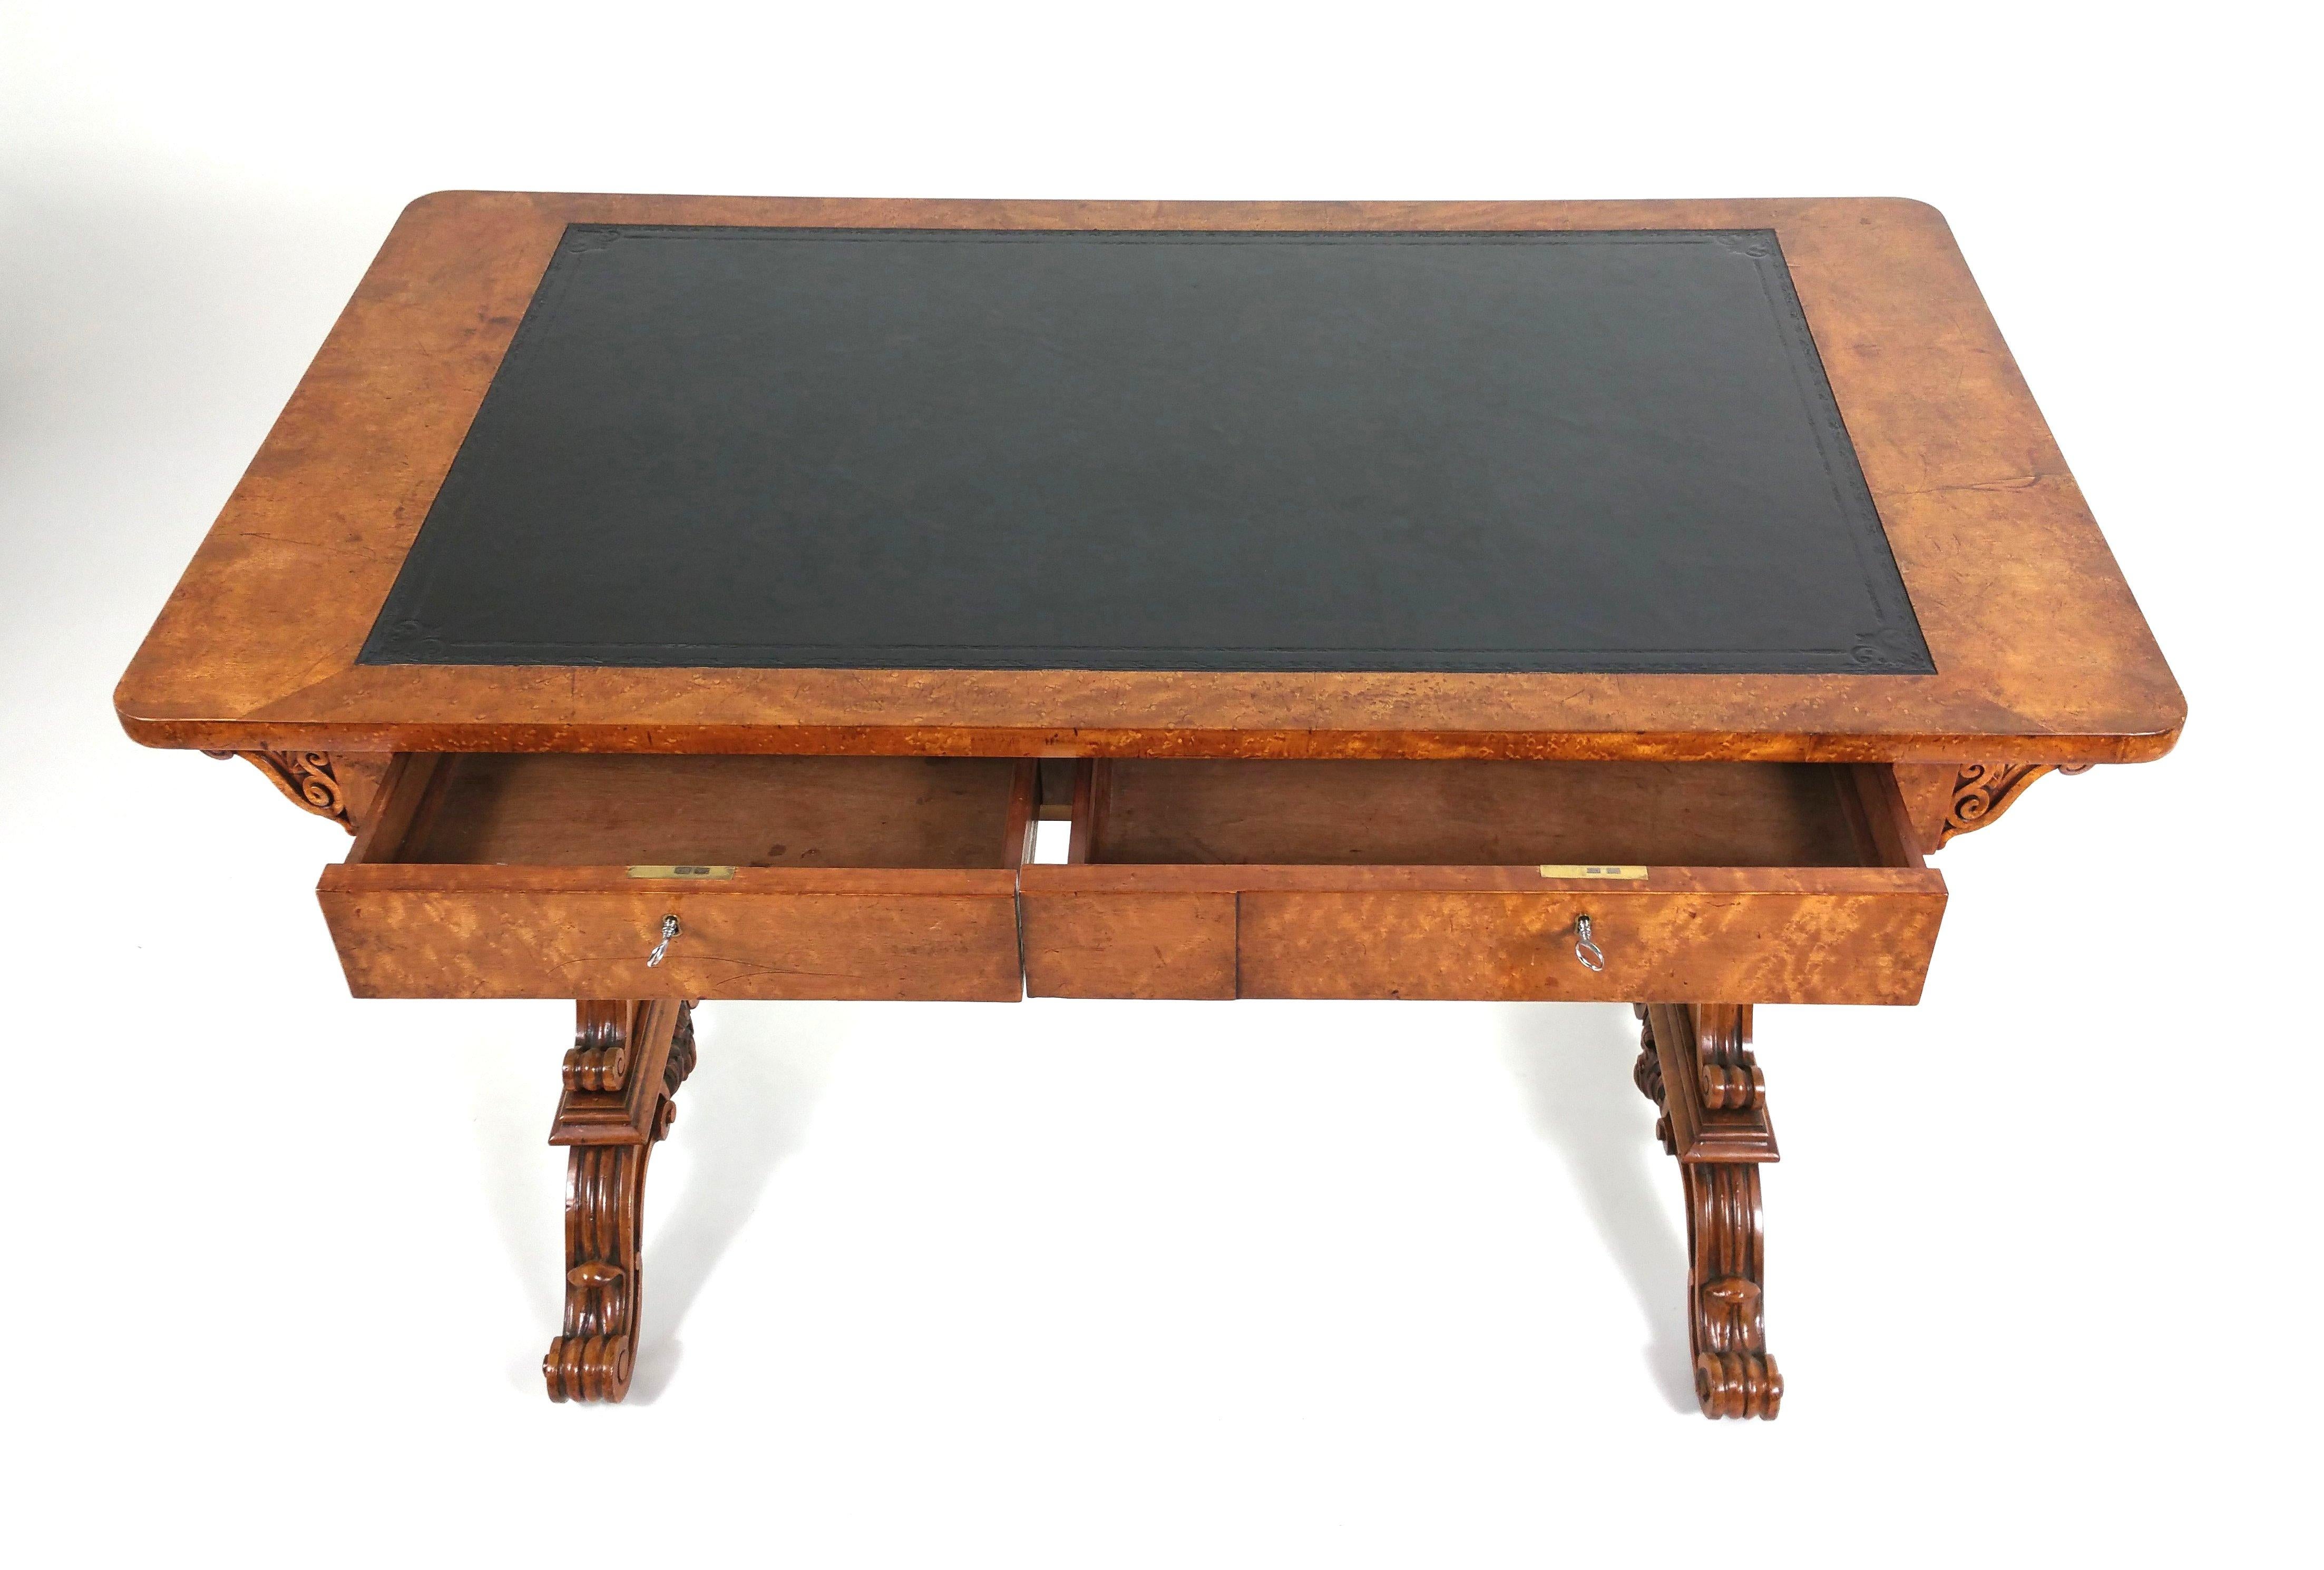 Early 19th Century Satin Birch 2-Drawer Library Table im Zustand „Gut“ in London, west Sussex